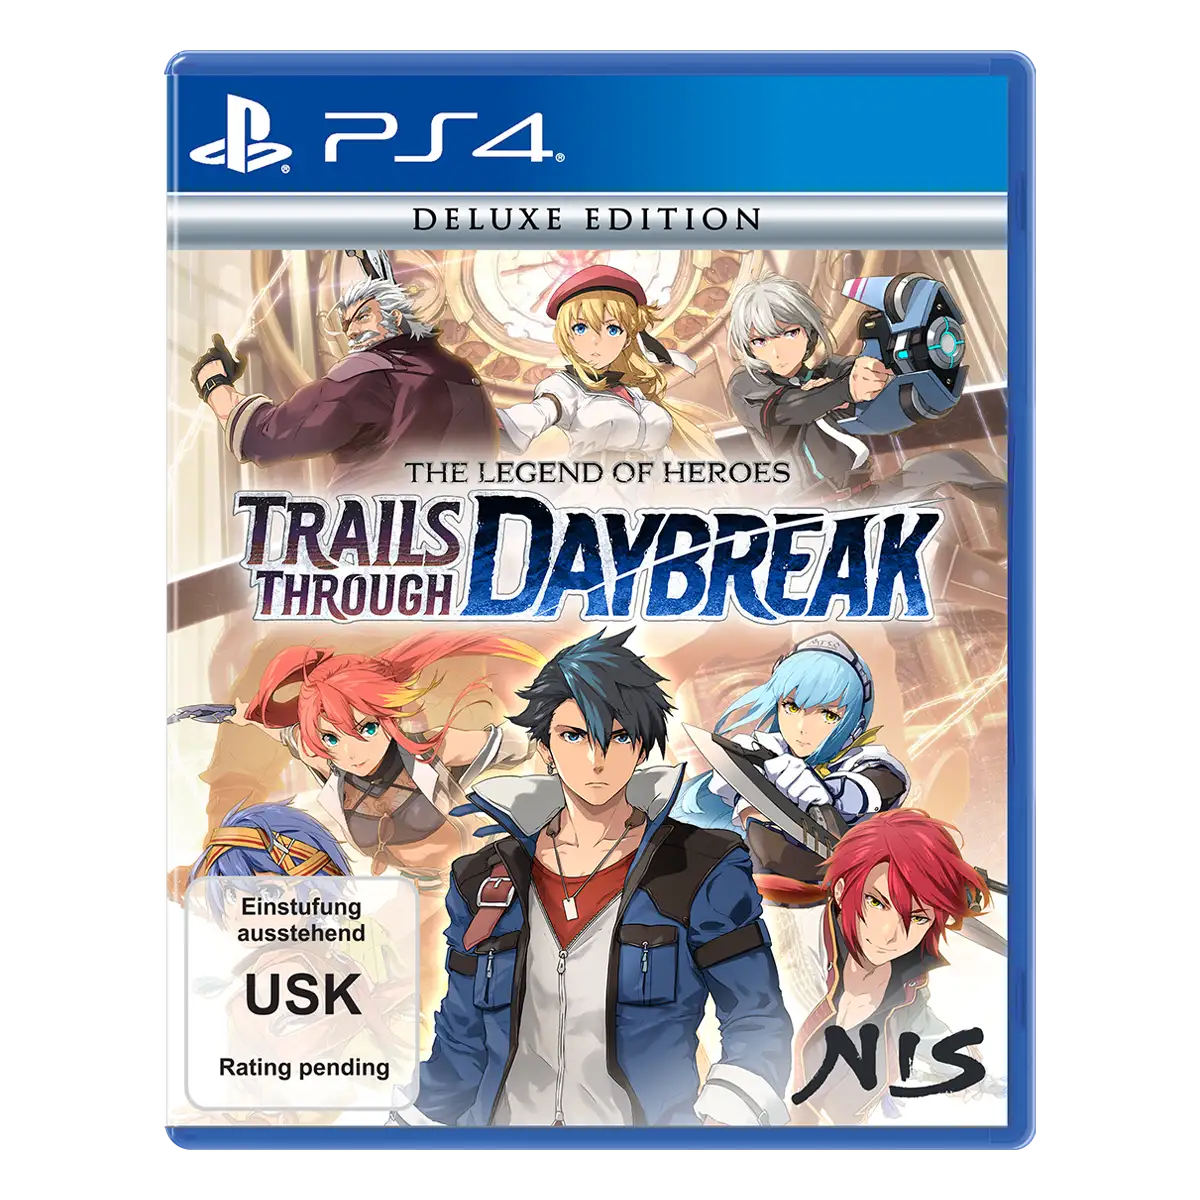 The Legend of Heroes: Trails through Daybreak - Deluxe Edition (PS4) Cover